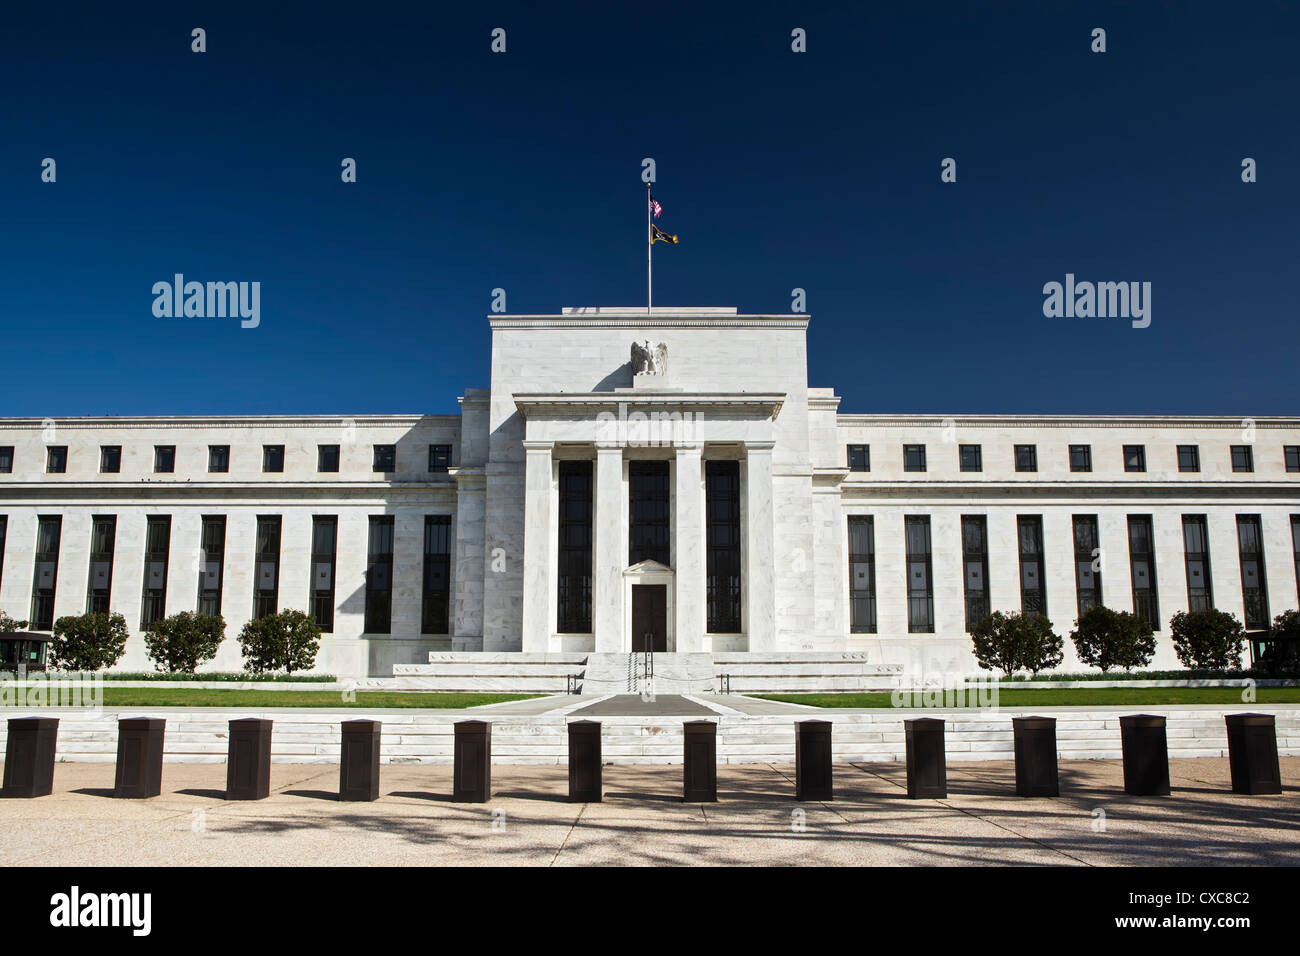 The United States Federal Reserve Building, Washington D.C., United States of America, North America Stock Photo